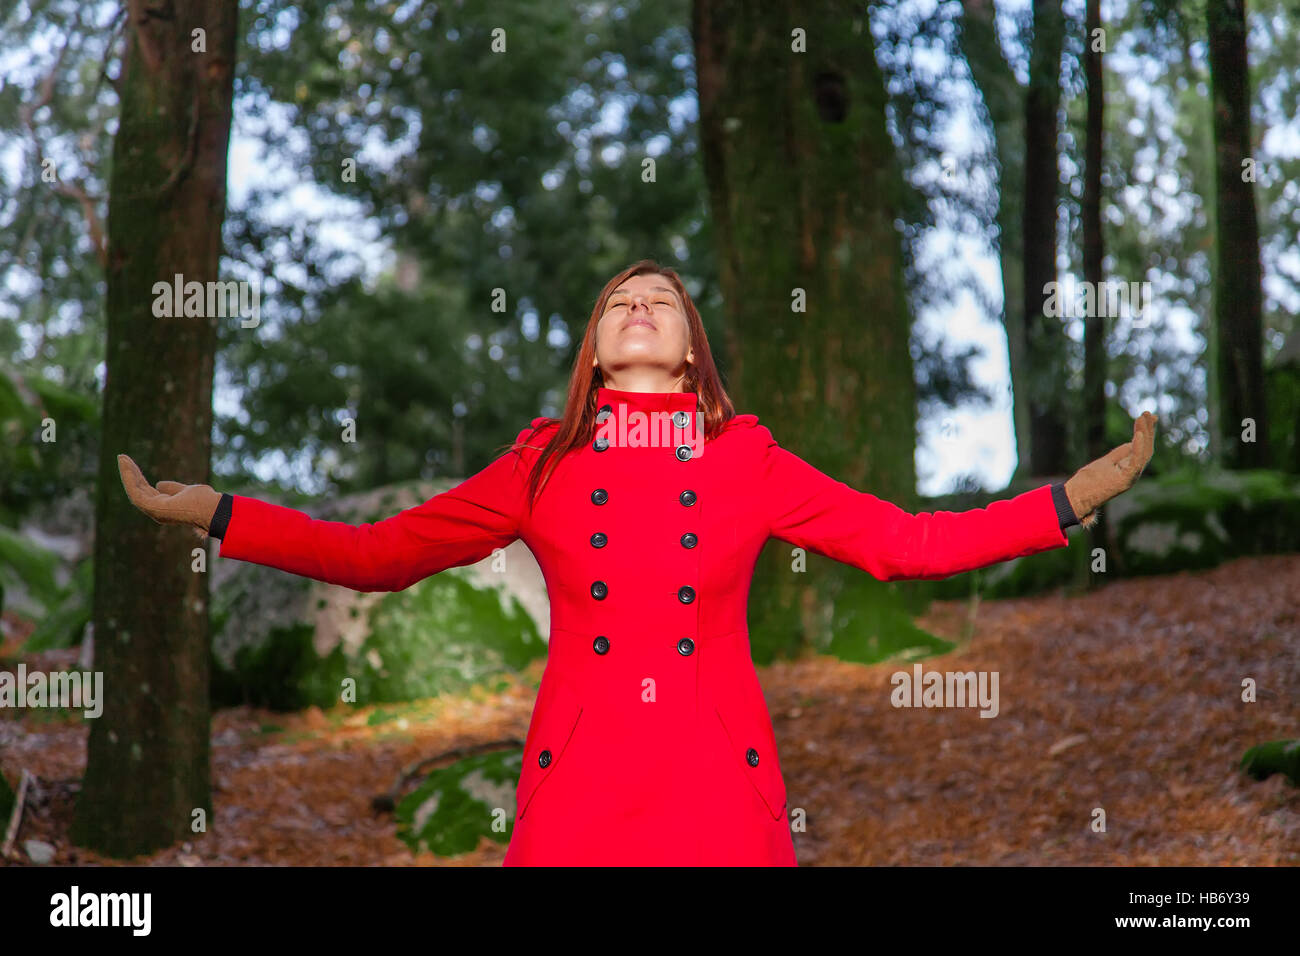 Woman enjoying the warmth of the winter sunlight on a forest wearing a red long coat Stock Photo